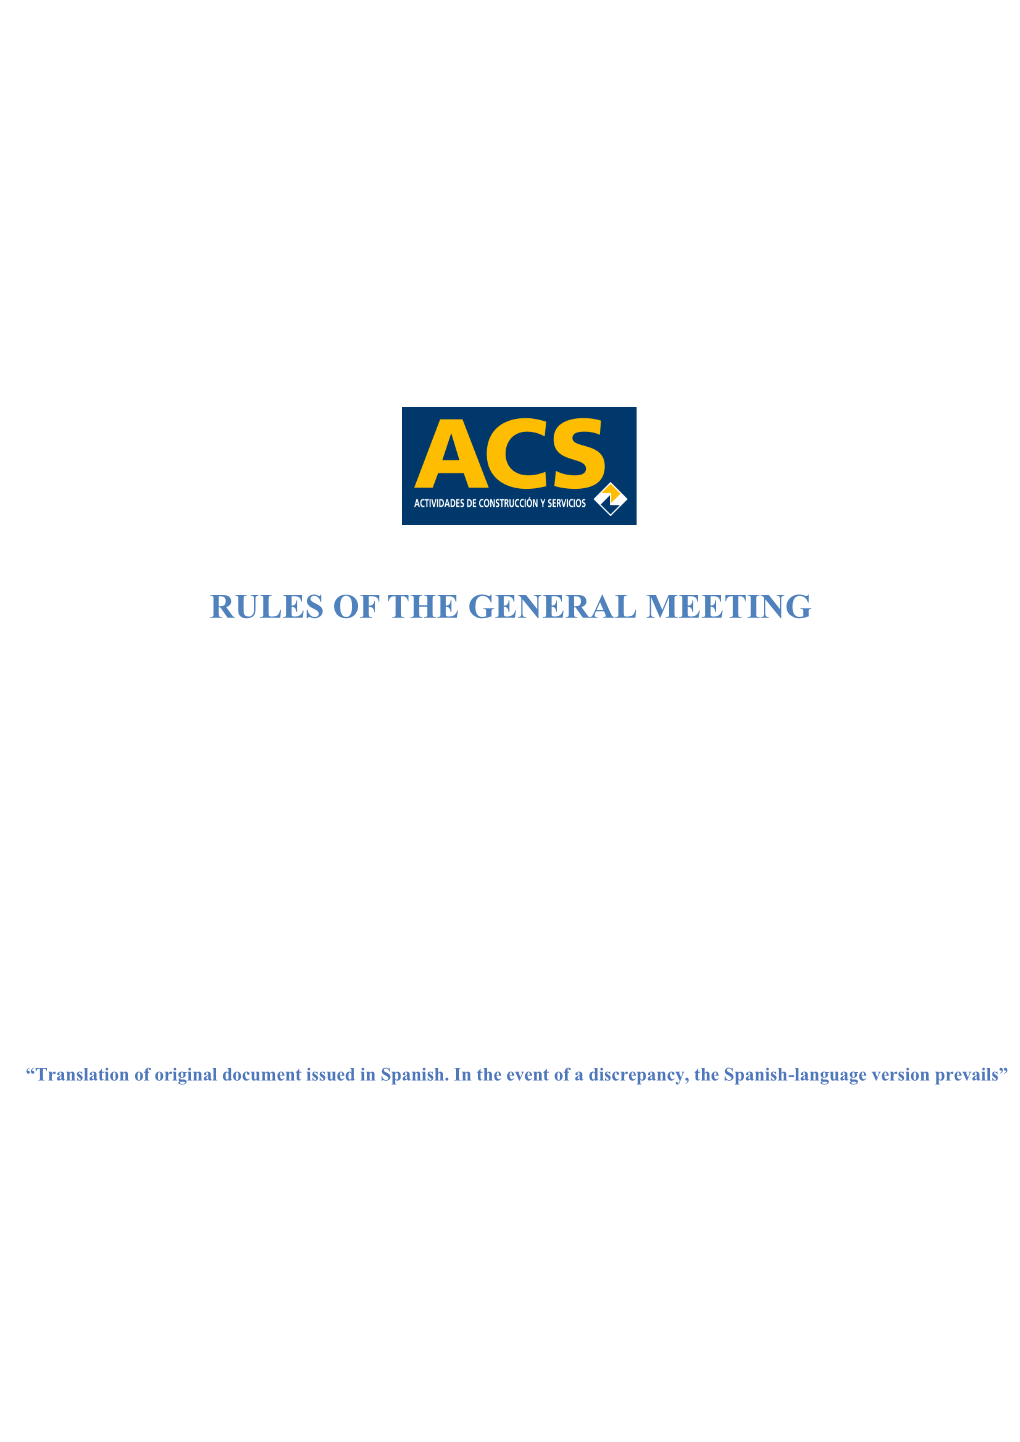 Rules of the General Meeting